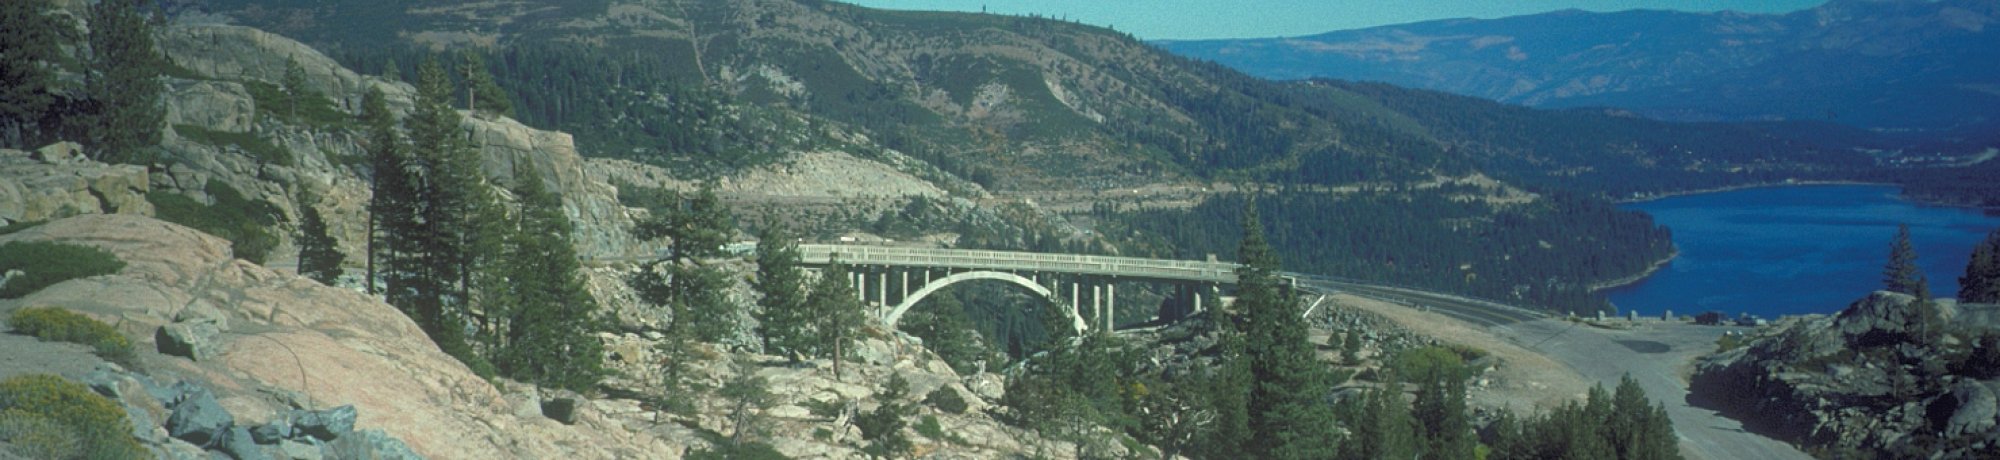 Donner Pass Photo Gallery